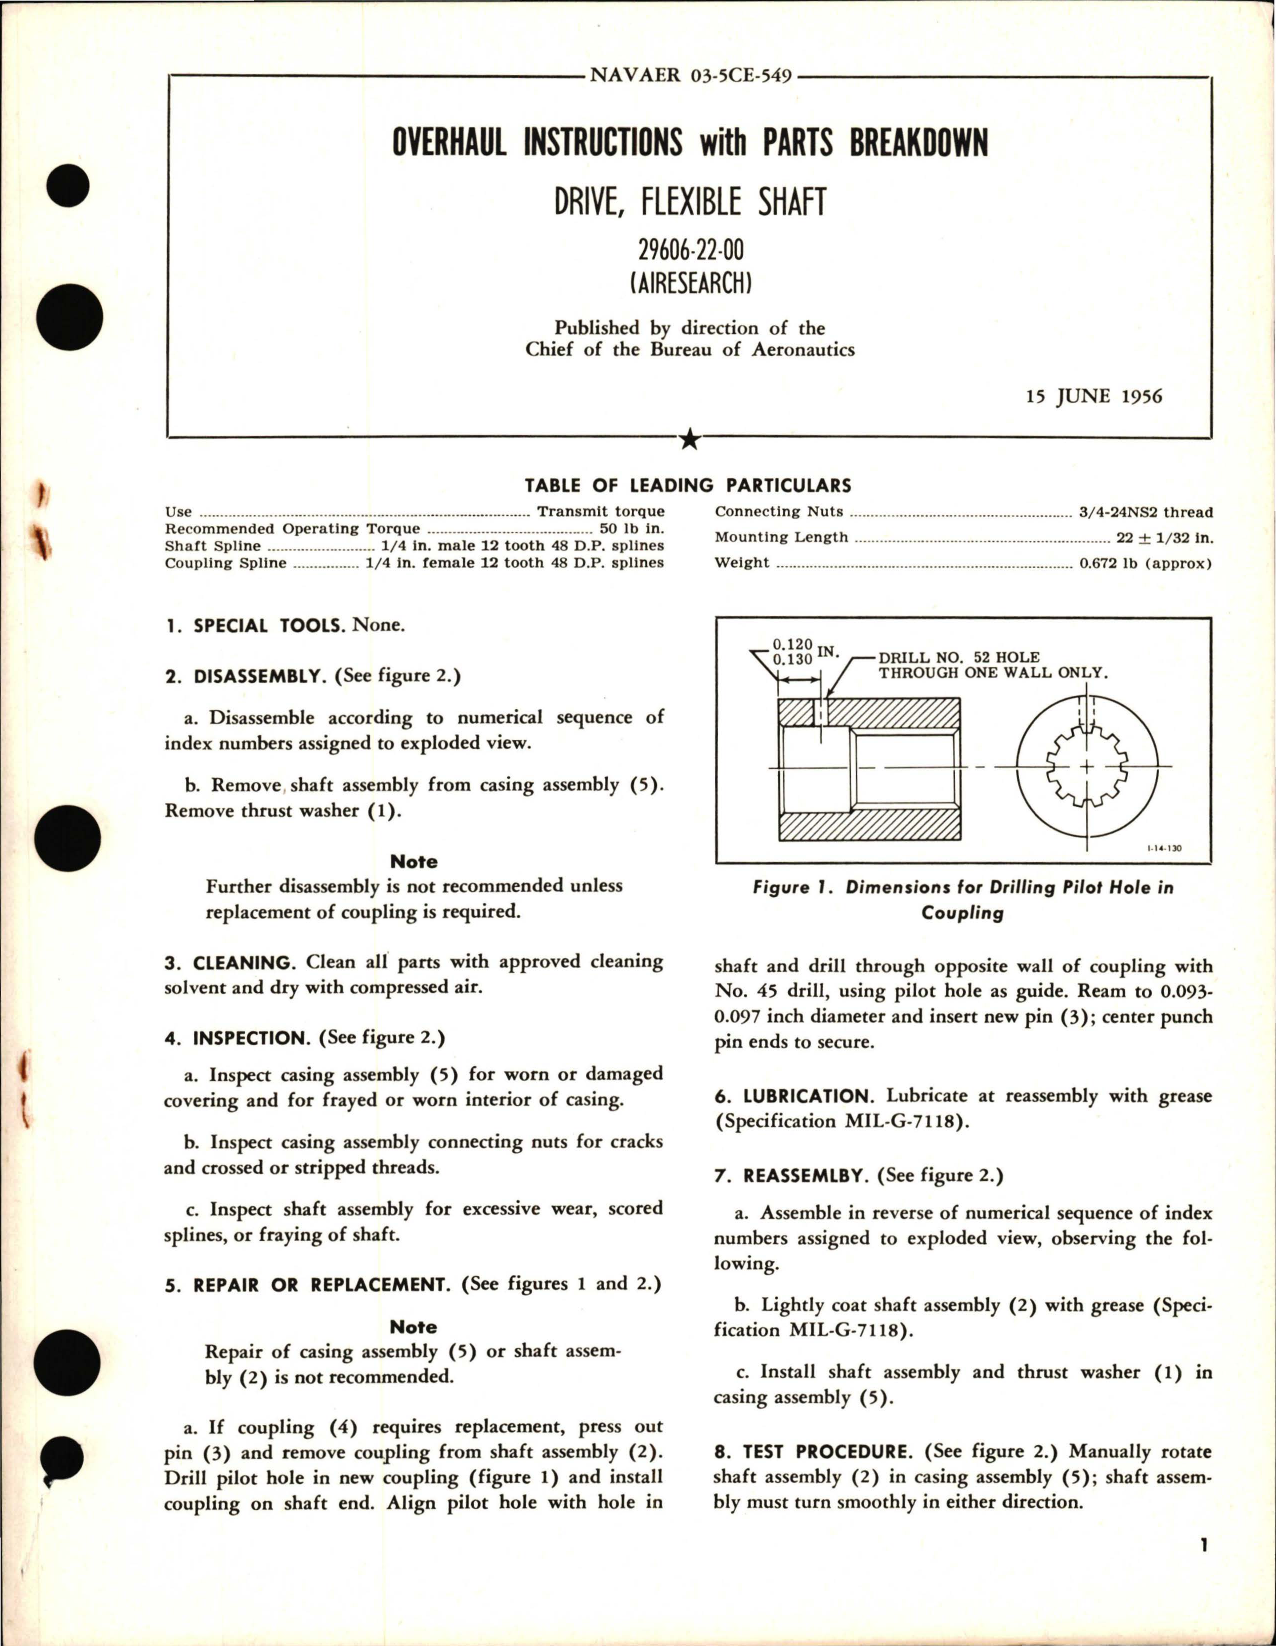 Sample page 1 from AirCorps Library document: Overhaul Instructions with Parts Breakdown for Flexible Shaft Drive